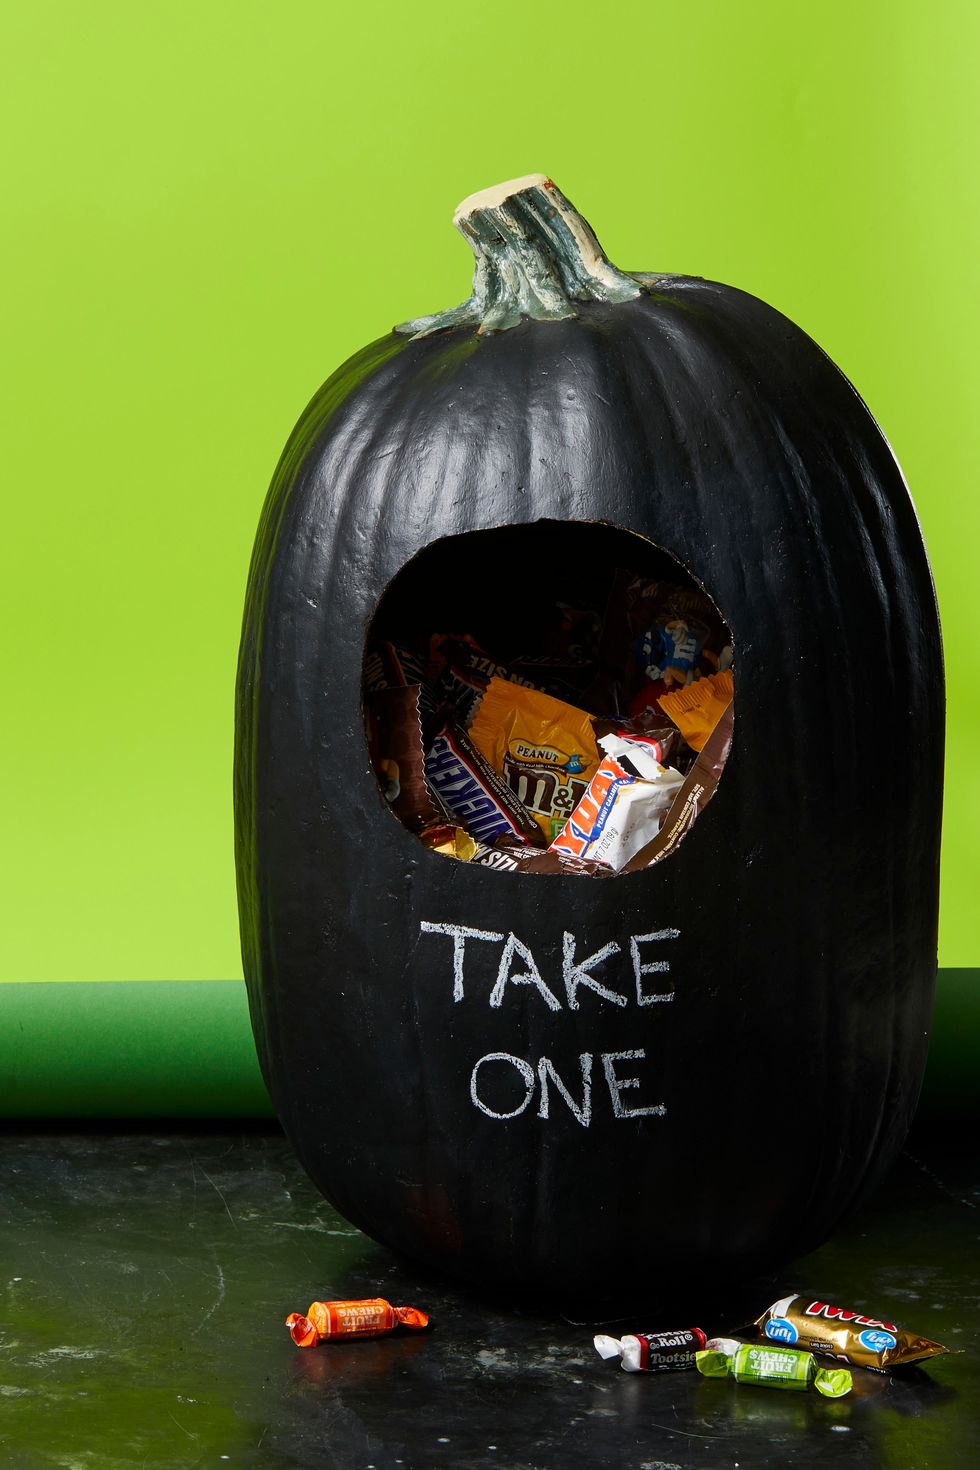 Black pumpkin with "Take One" written on it, filled with delicious chocolate—a tempting Halloween treat for all